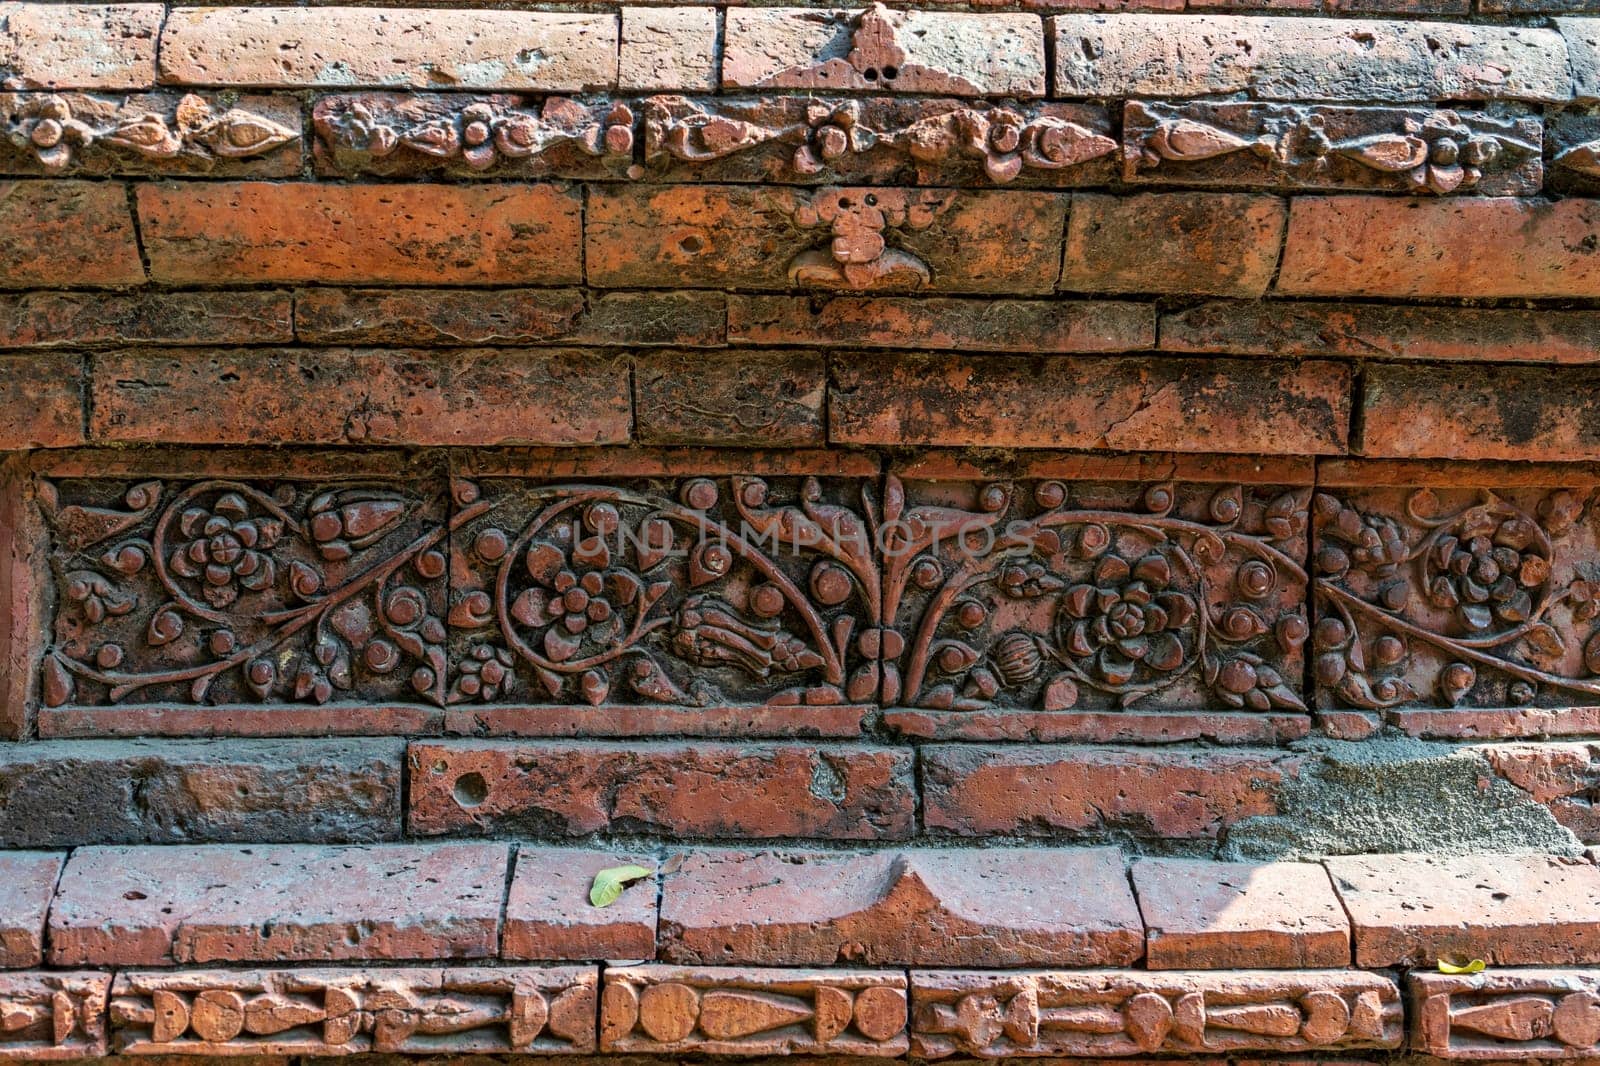 Terracotta patterns ancient stone carving, pattern on the stone wall of Bagha Shahi Mosque by paca-waca